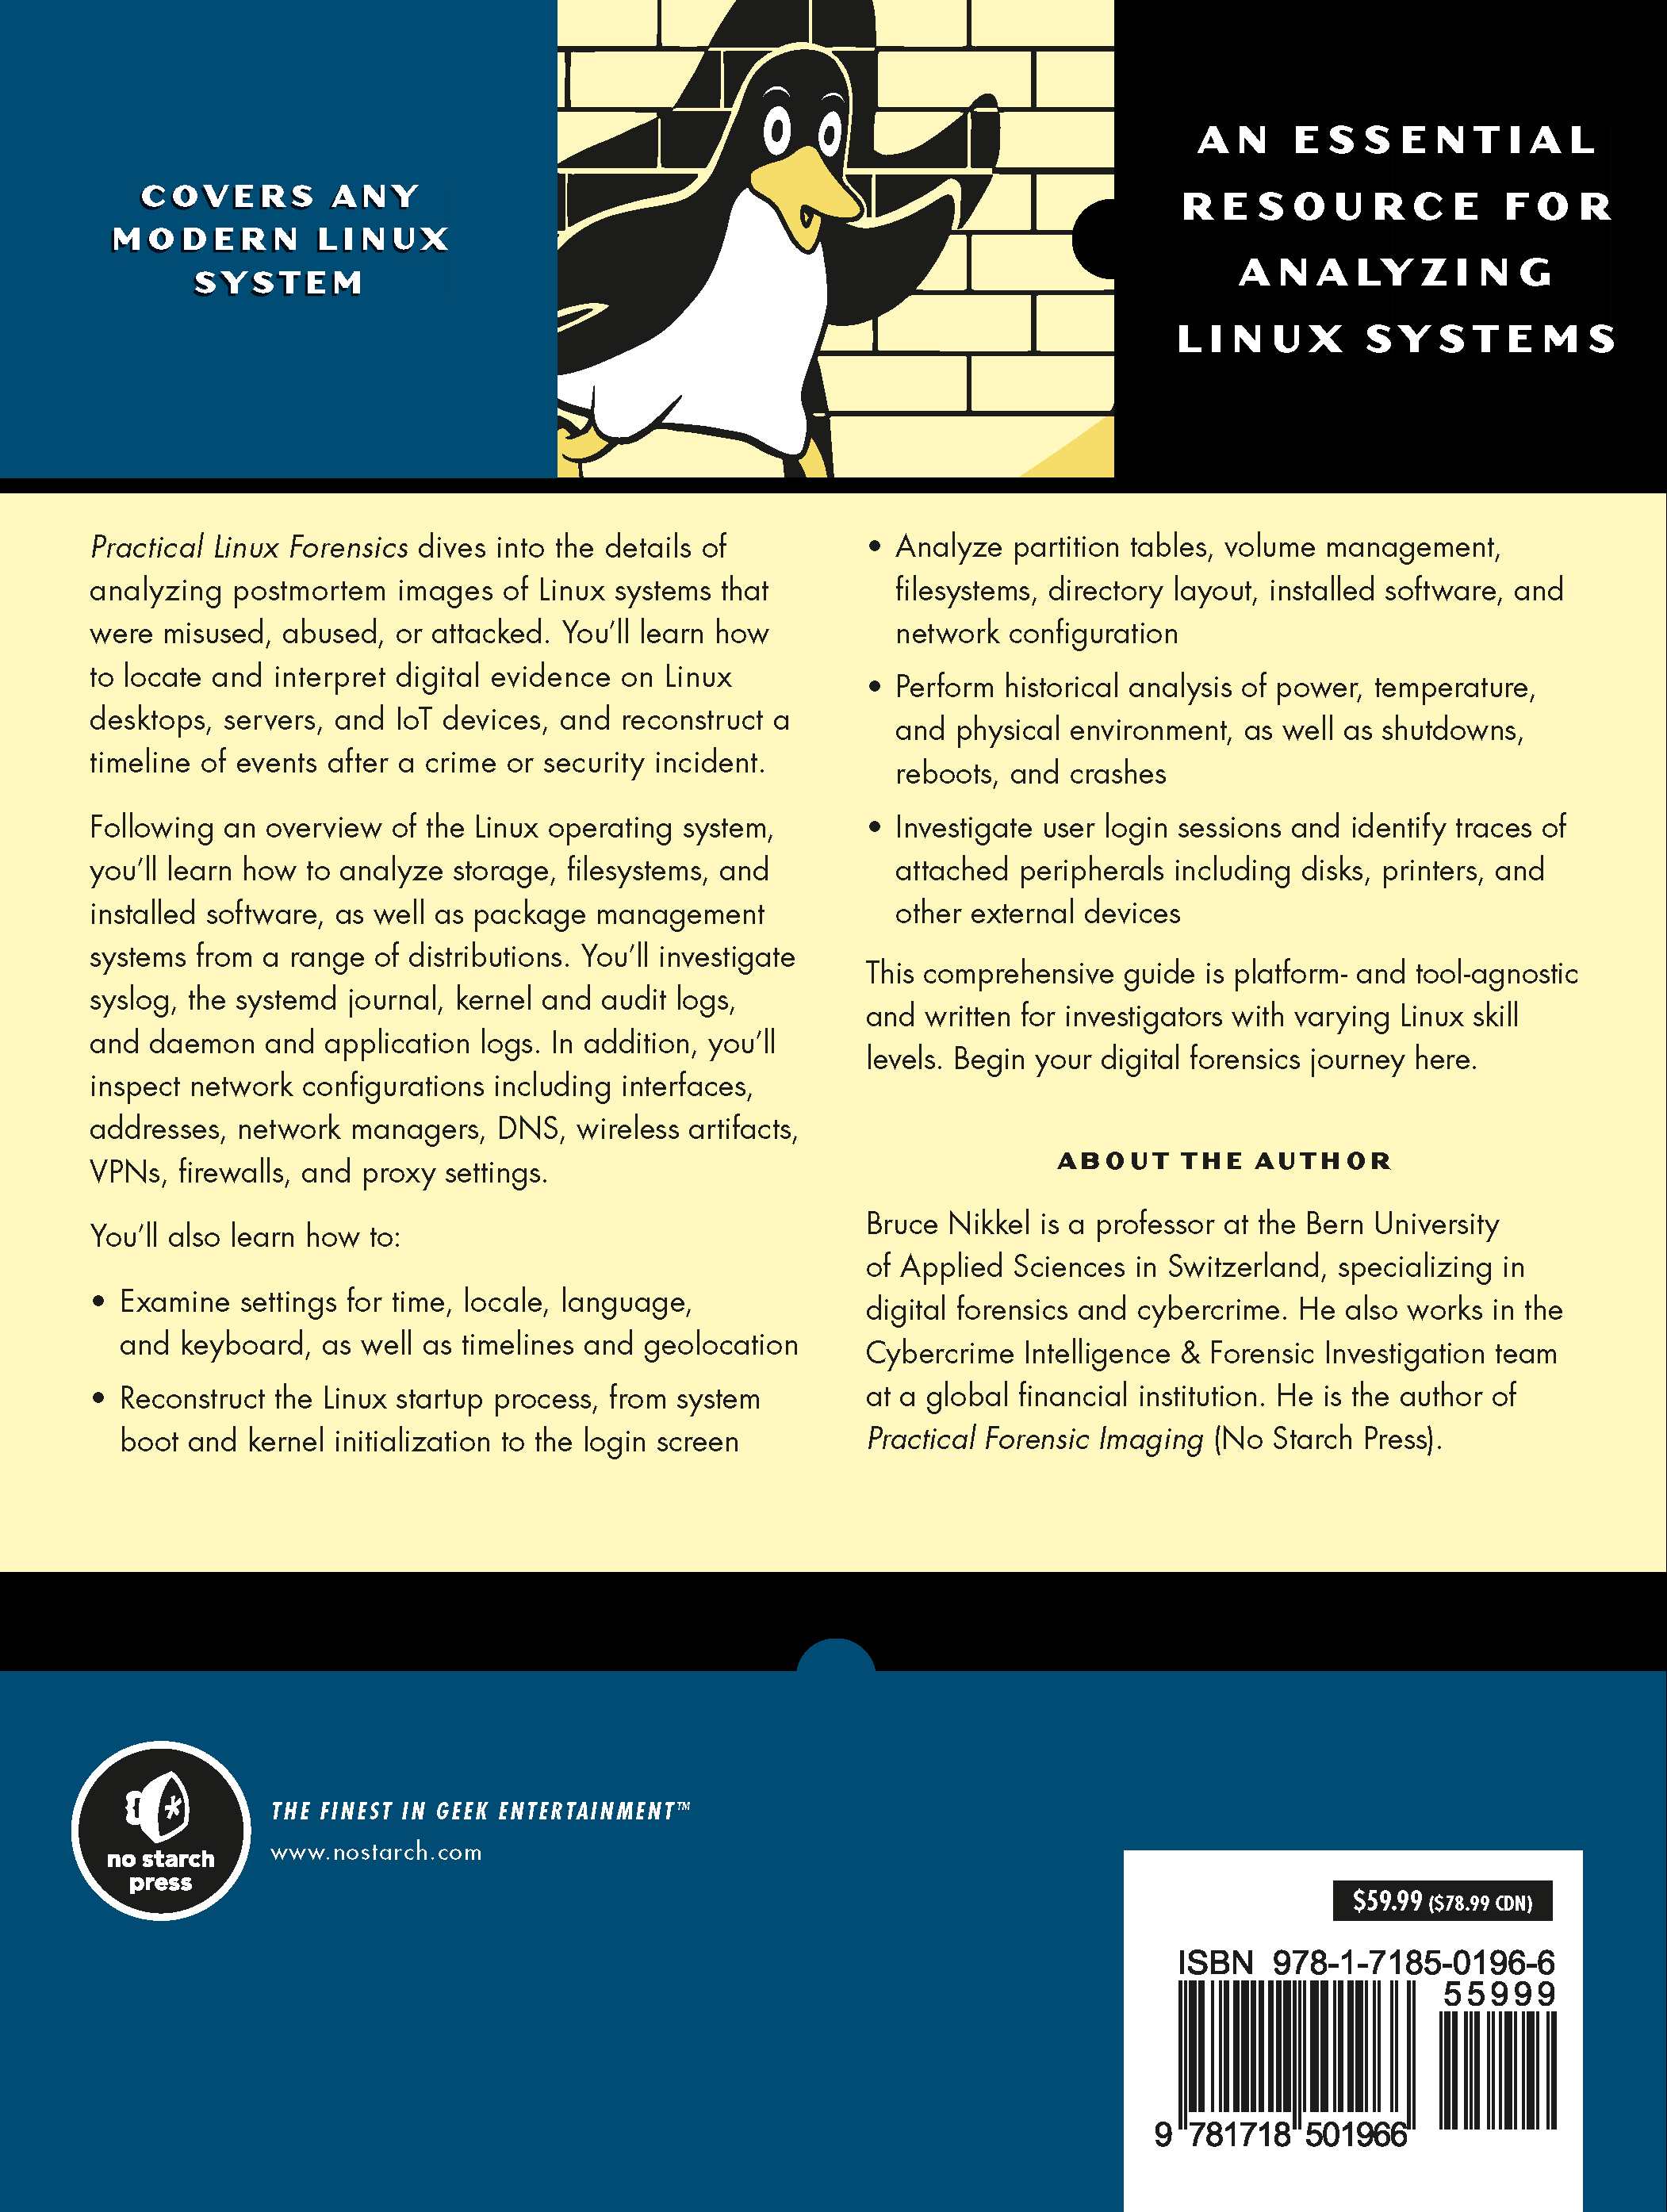 Practical Linux Forensics back cover